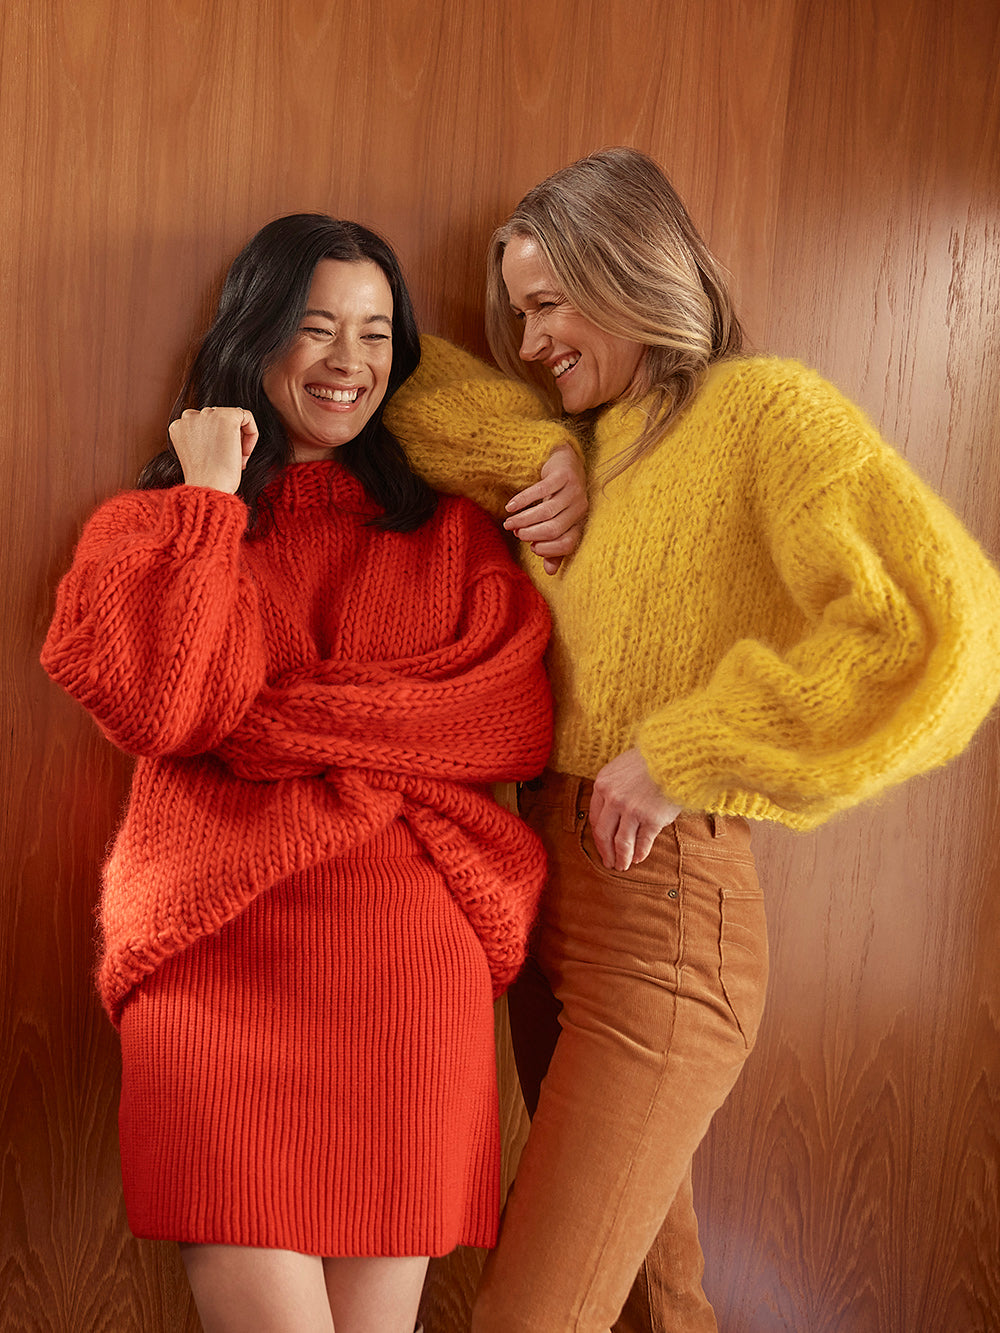 Two women are laughing in front of a wooden door. They are both wearing bright colourful fluffy chunky knitted jumpers. 